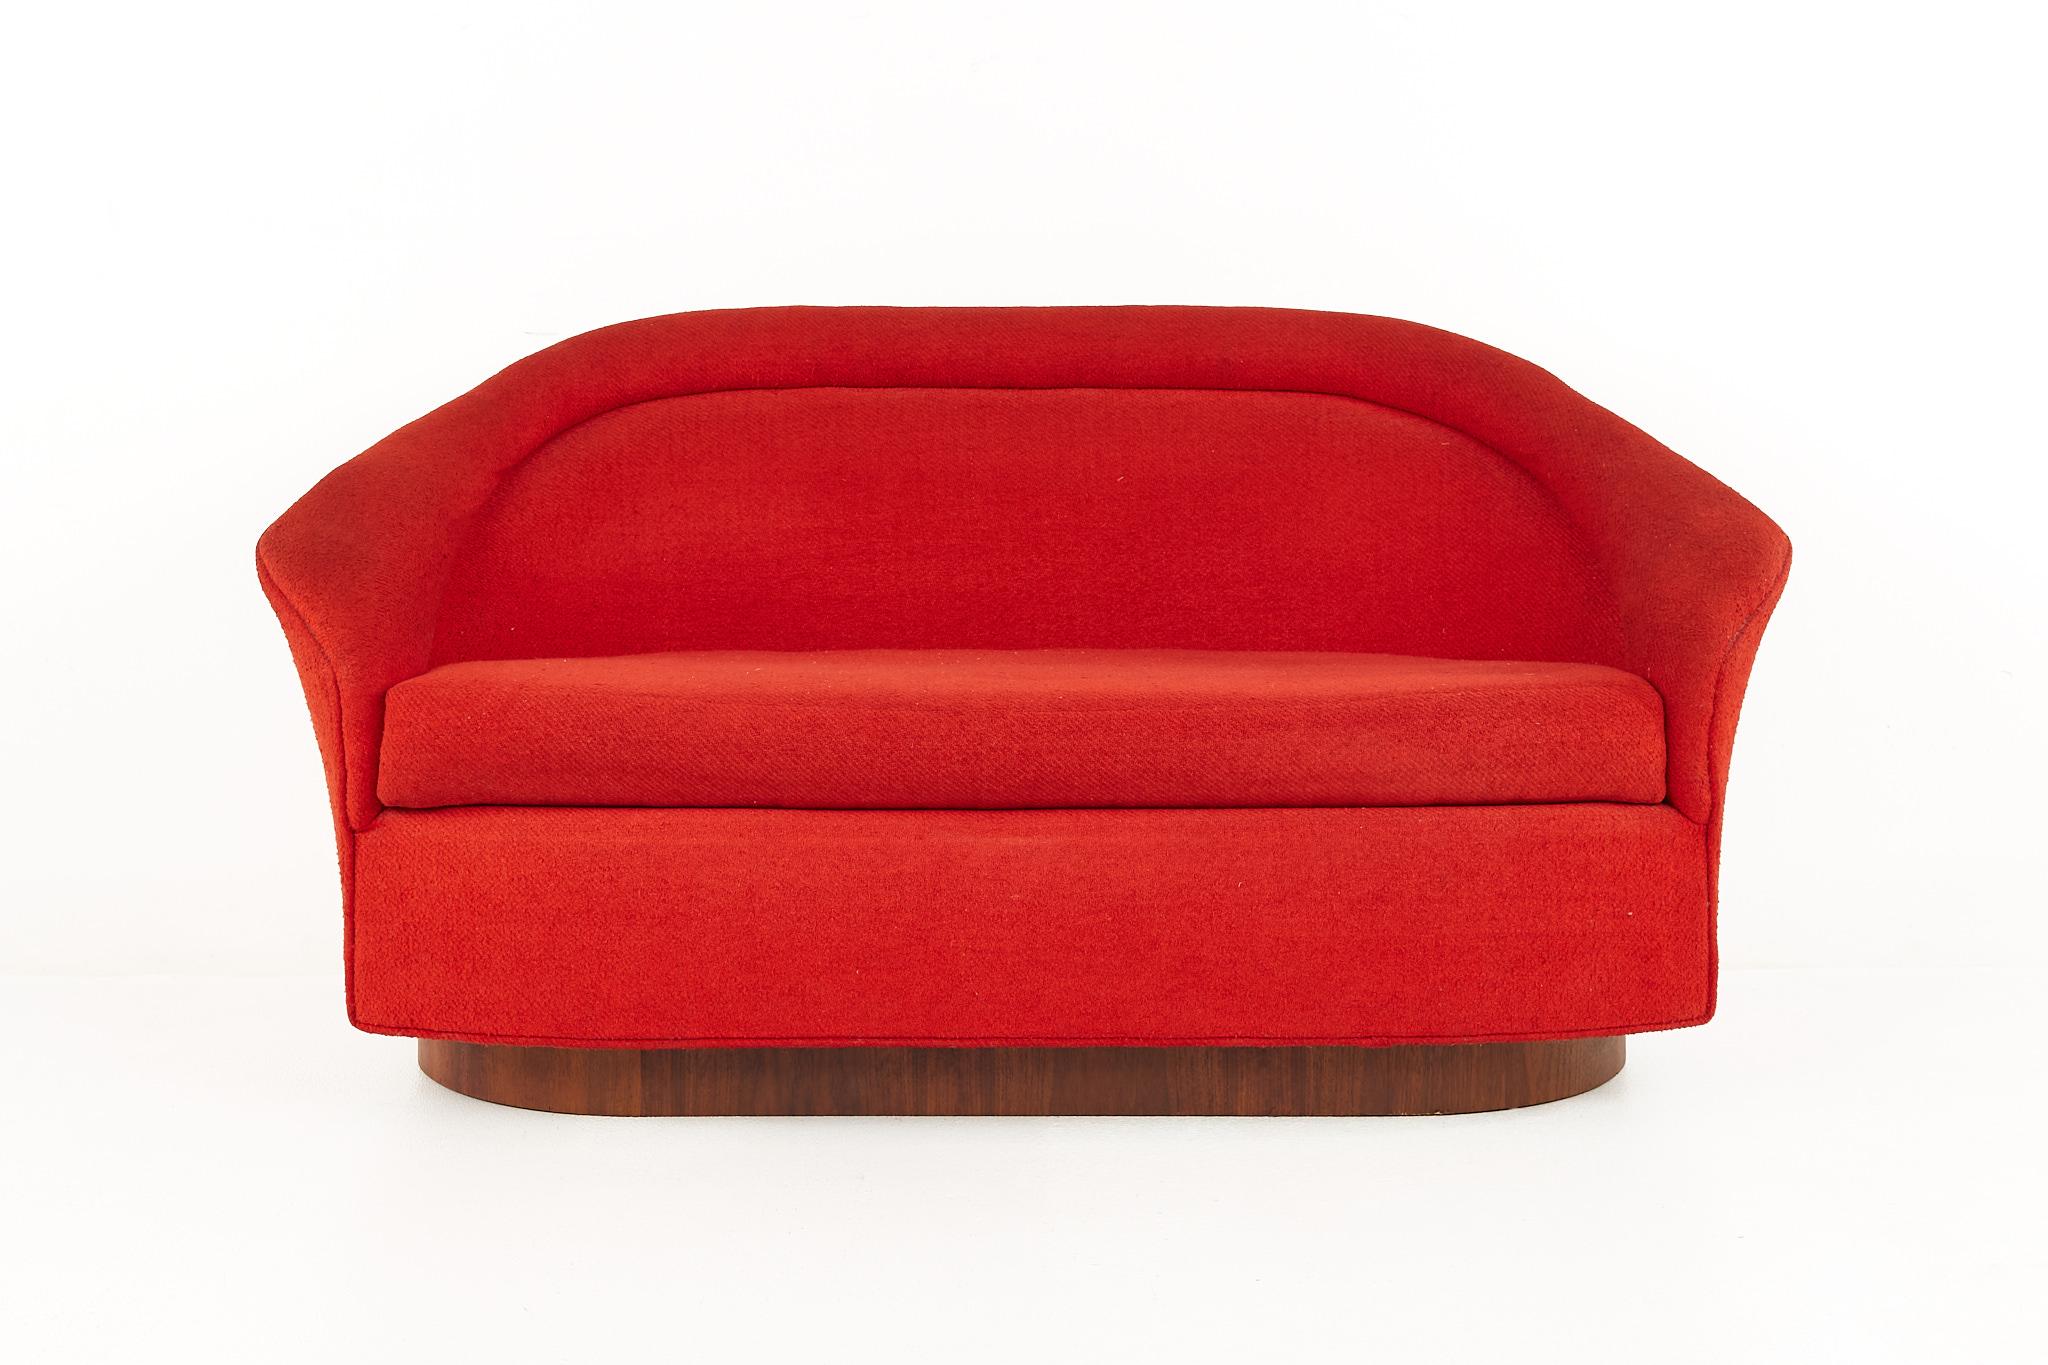 Adrian Pearsall for Craft Associatesmid century walnut plinth base red loveseat

This loveseat measures: 59.5 wide x 27 deep x 29.5 inches high, with an arm height of 25 inches

All pieces of furniture can be had in what we call restored vintage